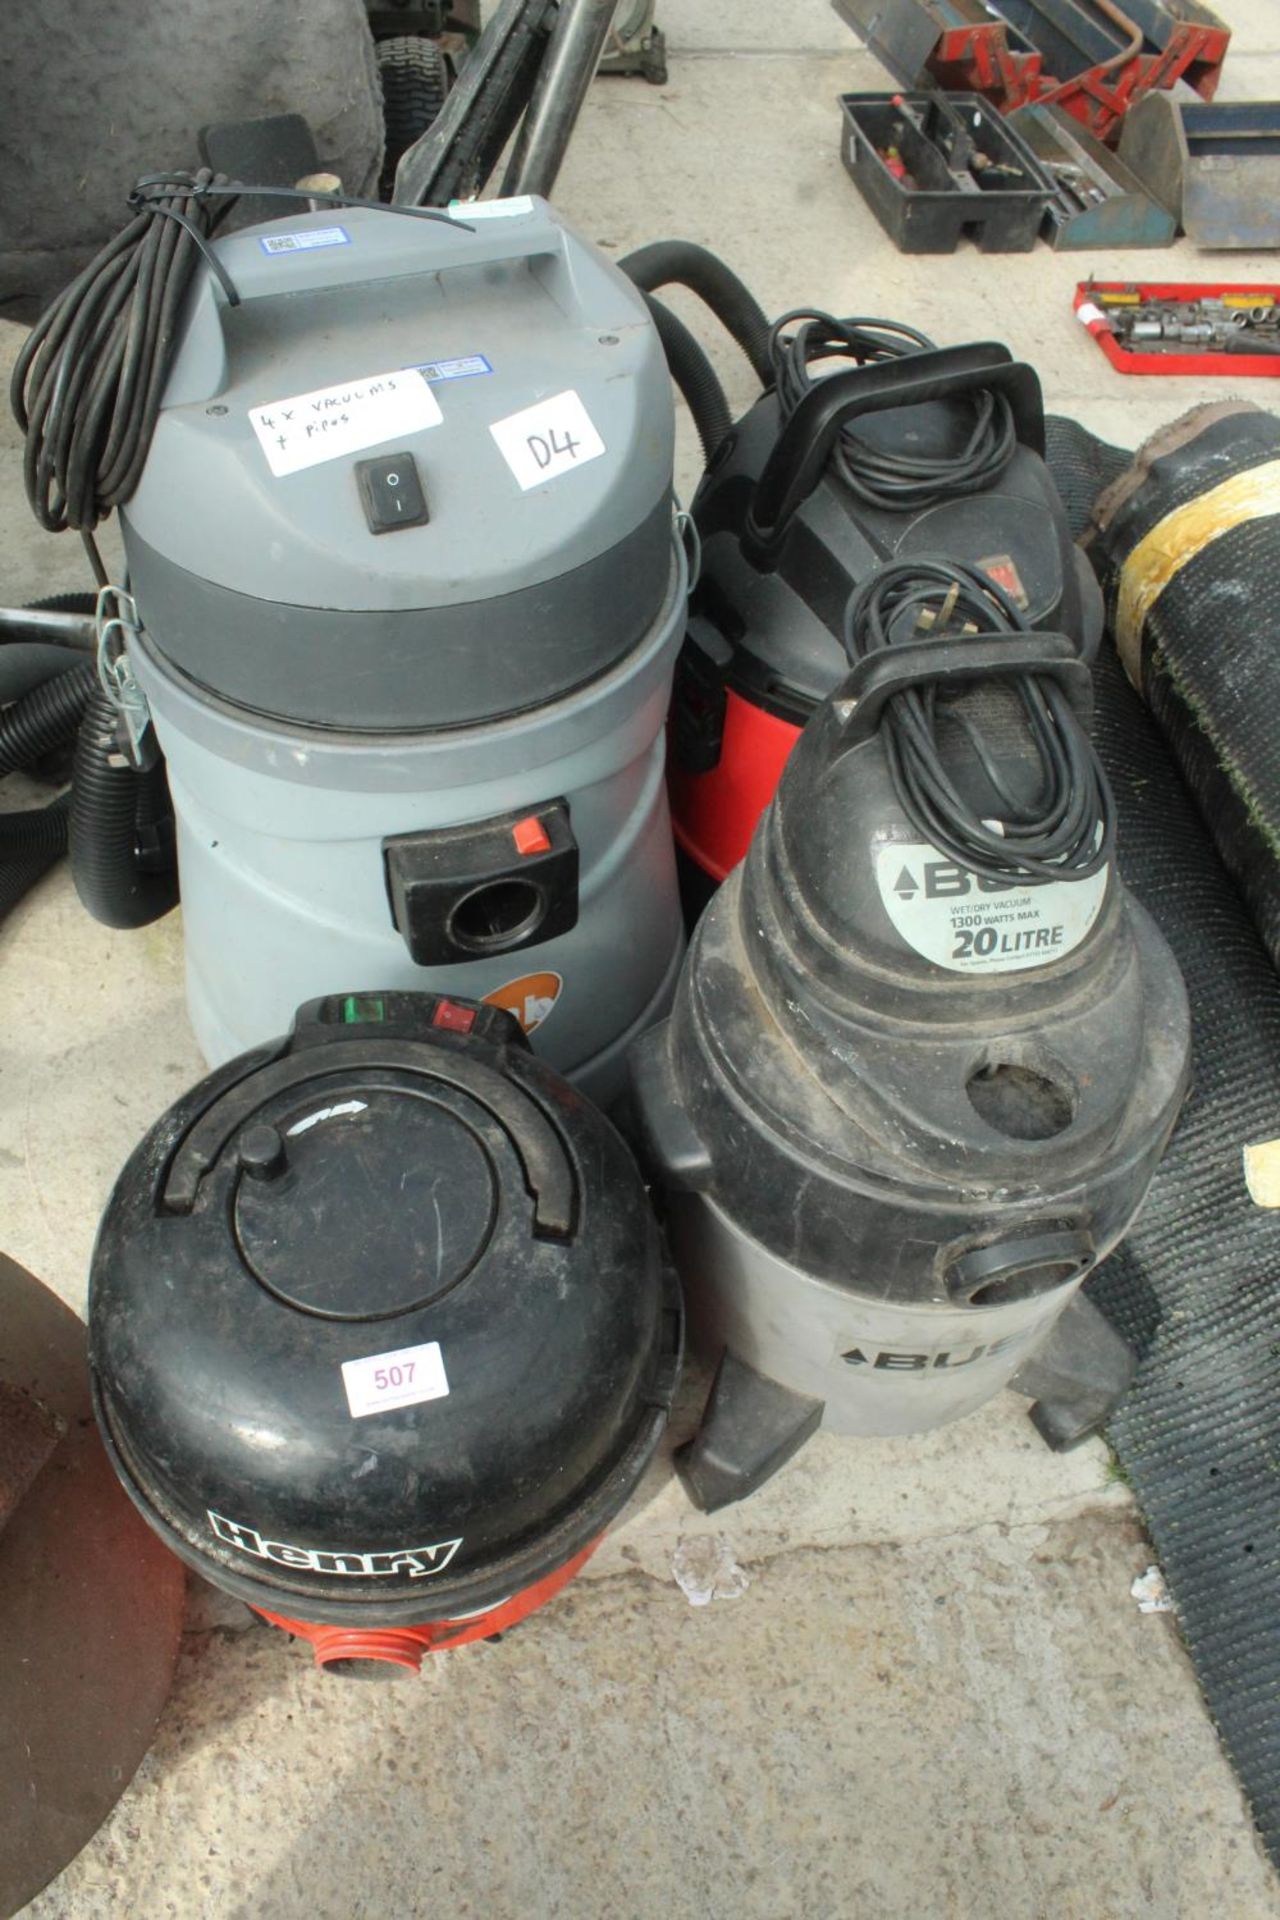 VACUUM CLEANERS AND PIPES 4 ITEMS NO VAT